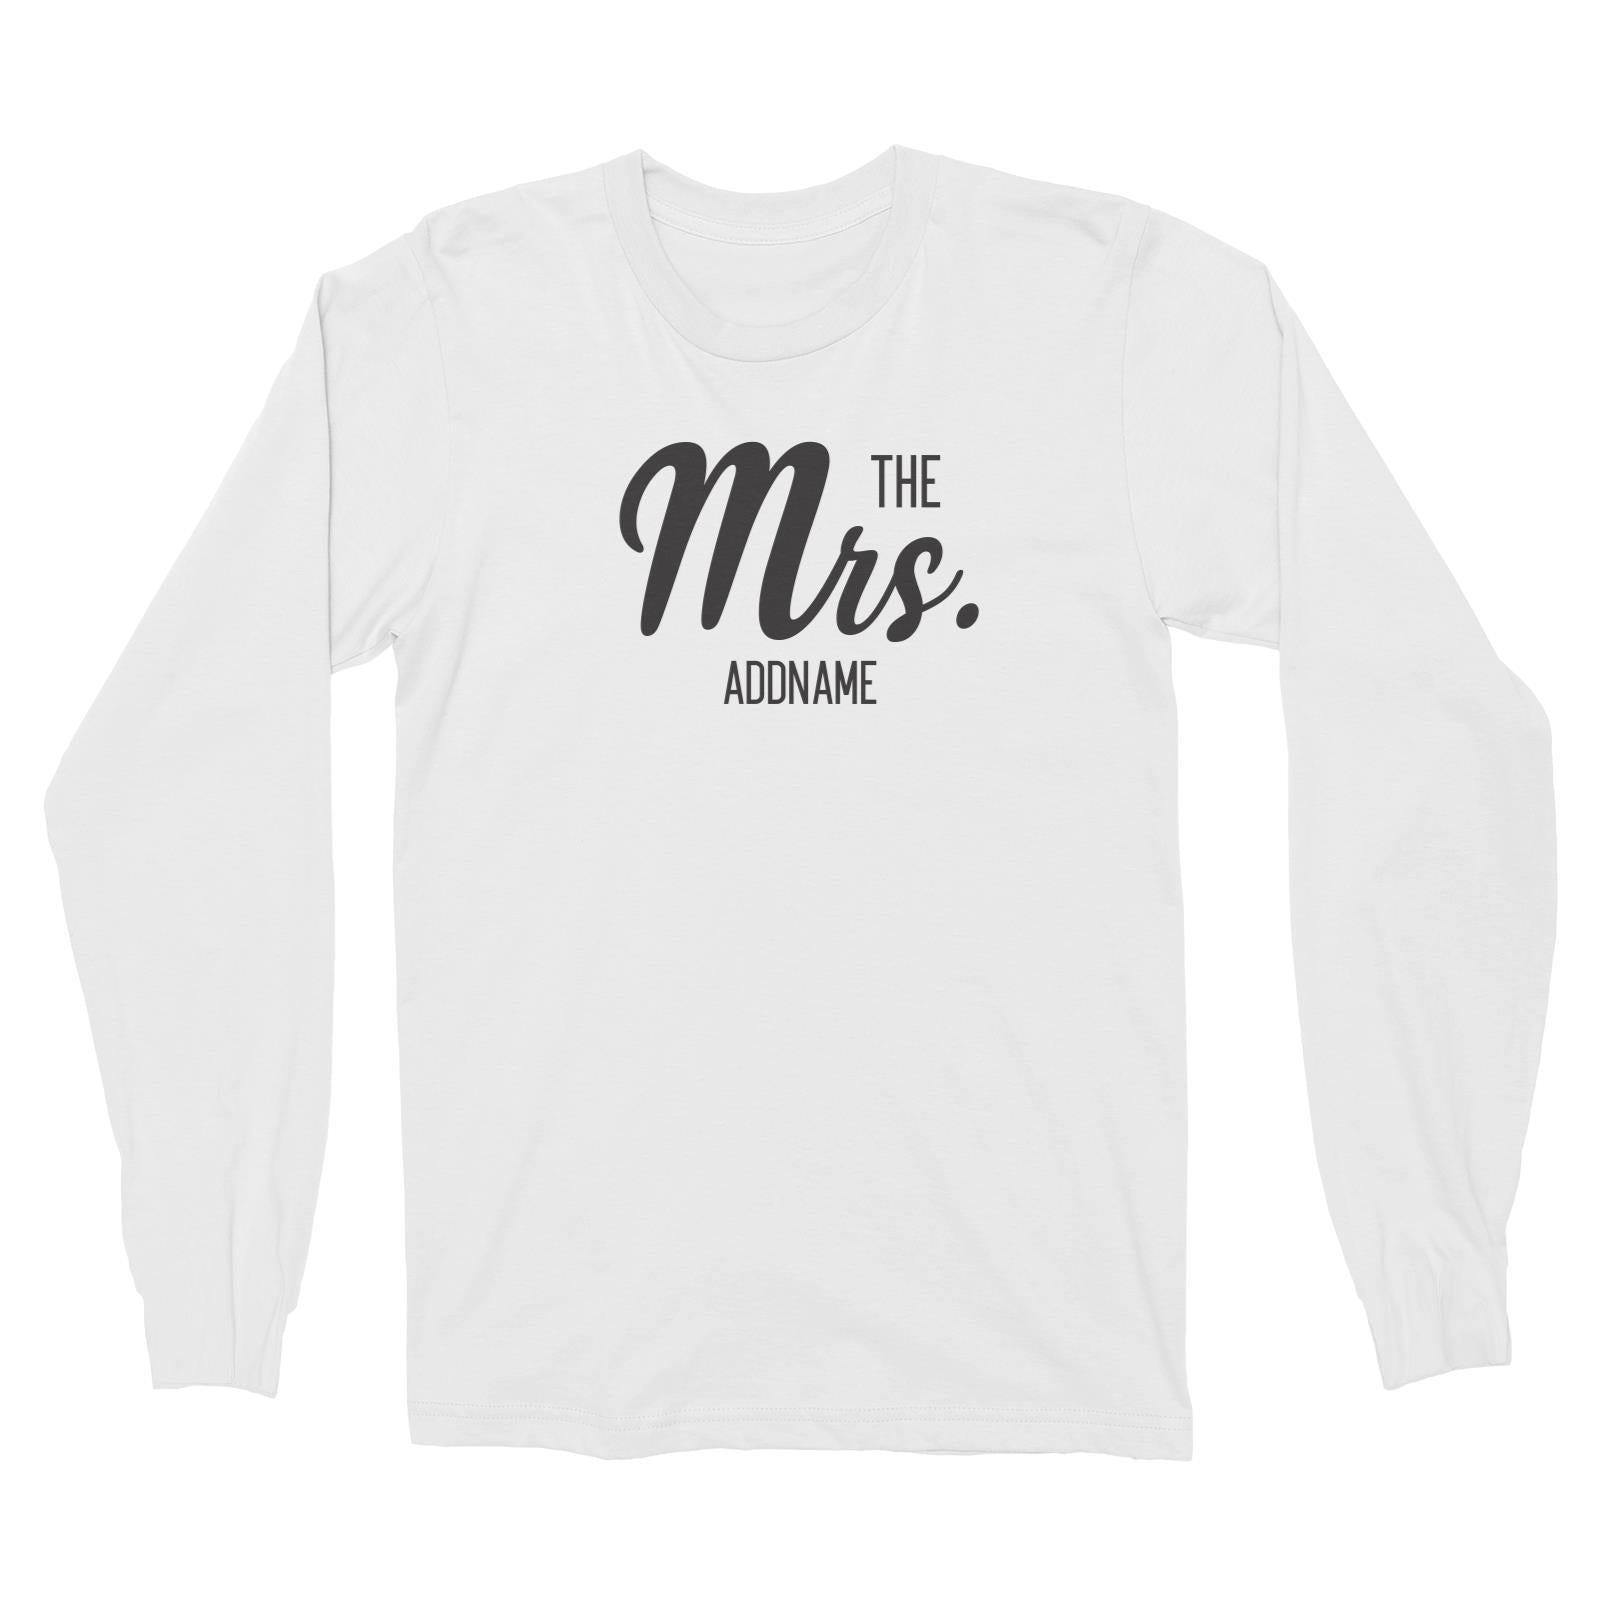 Husband and Wife The Mrs. Addname Long Sleeve Unisex T-Shirt